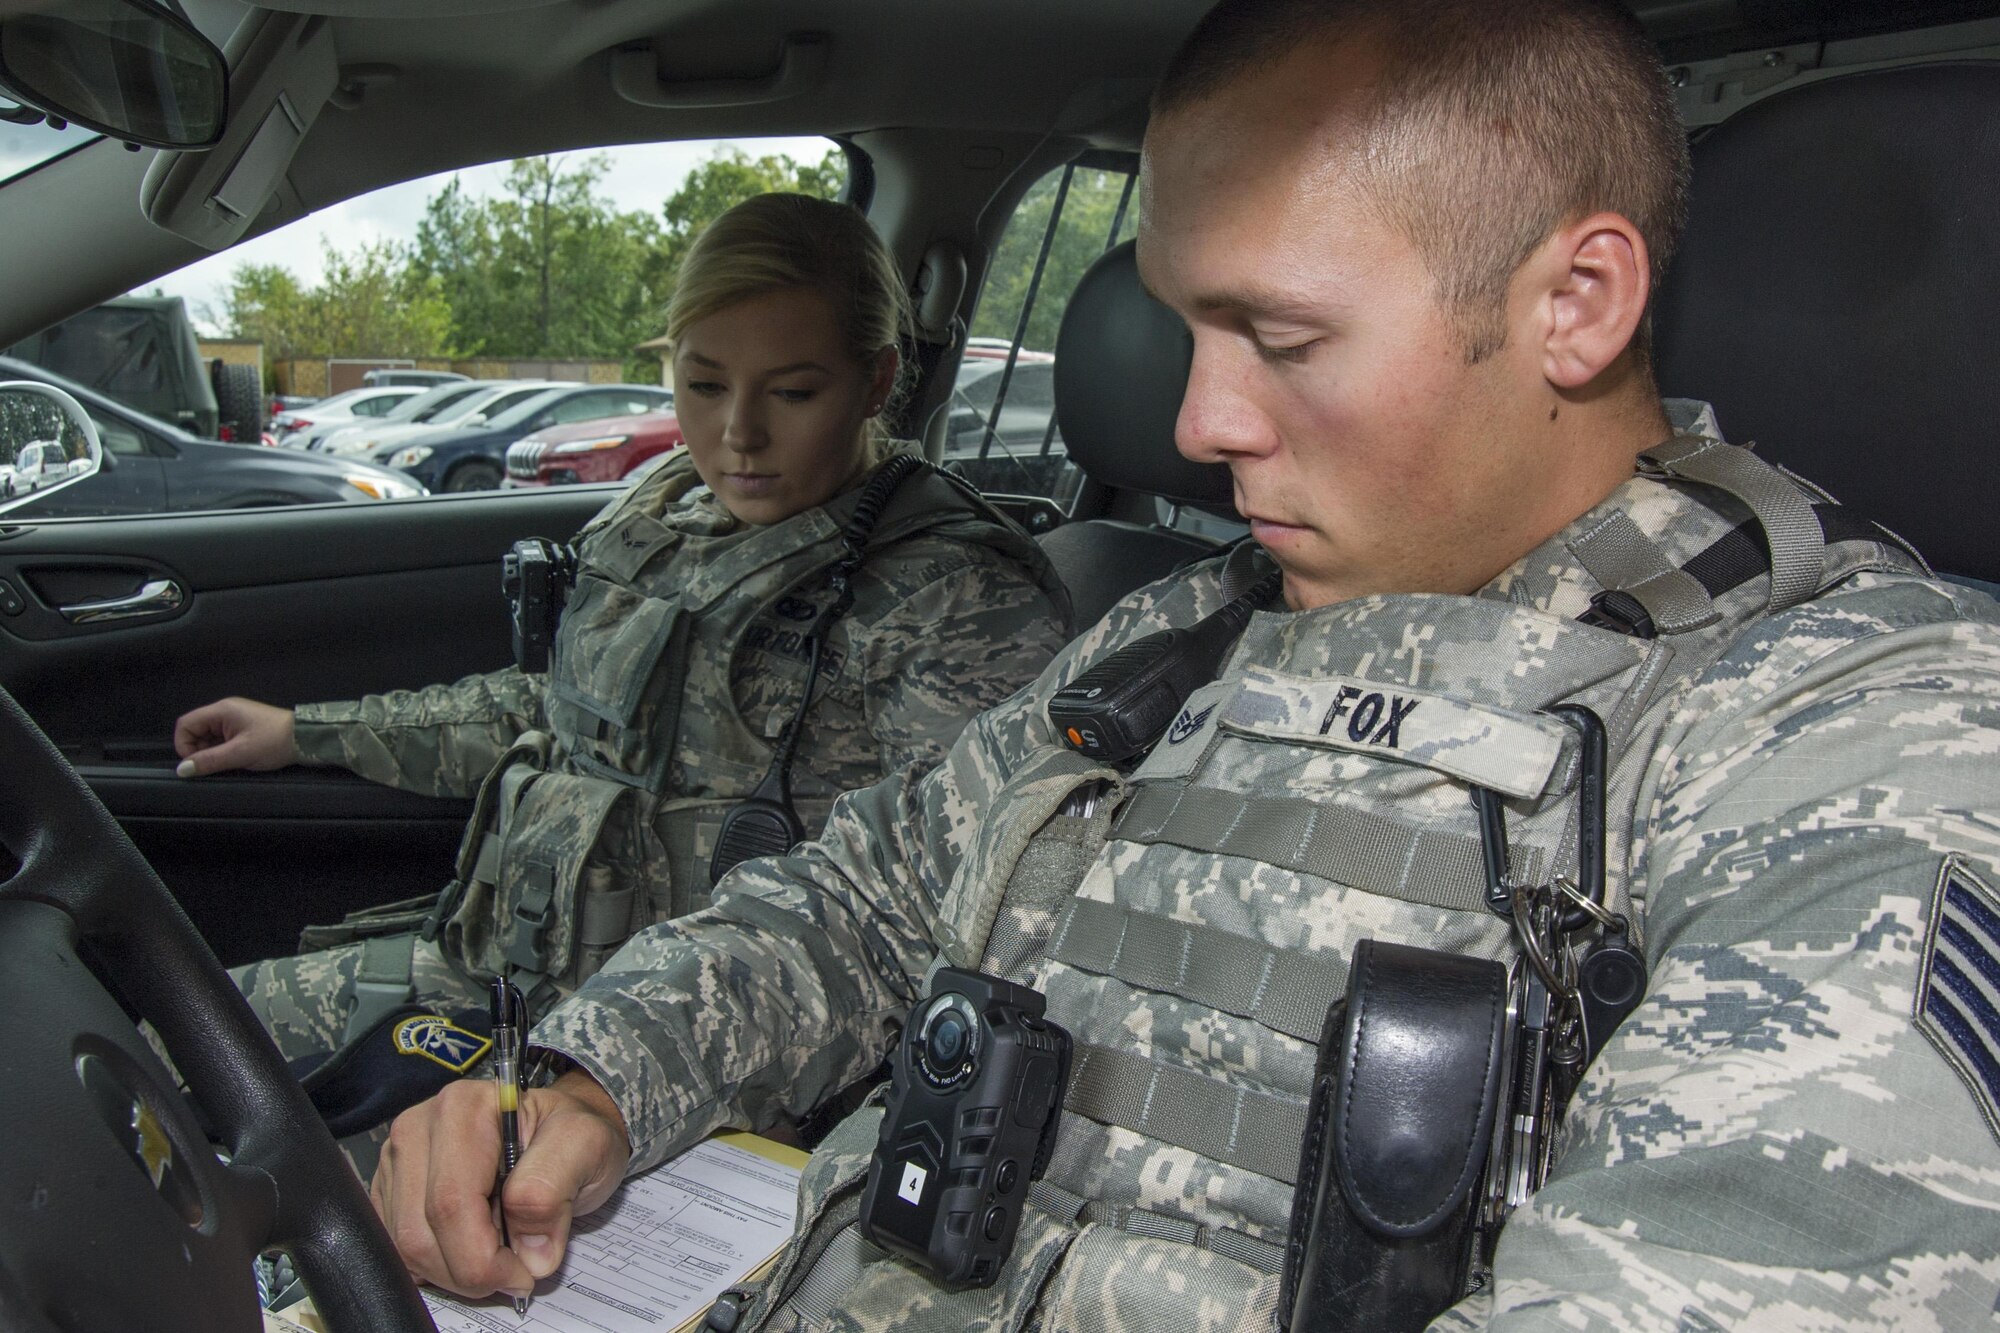 Staff Sgt. Sawyer Fox, right, and Airman 1st Class Sarah Shepherd, left, 11th Security Forces Squadron response force leaders, record information in a notebook during a patrol at Joint Base Andrews, Md., Oct. 4, 2016. JBA security forces defenders will be wearing the products for a period of six months as part of a test to determine which kind of camera to use throughout the Air Force. One of the main goals during the process is to disperse the new equipment information throughout the community to ensure they feel safe and aware. (U.S. Air Force photo by Senior Airman Jordyn Fetter)